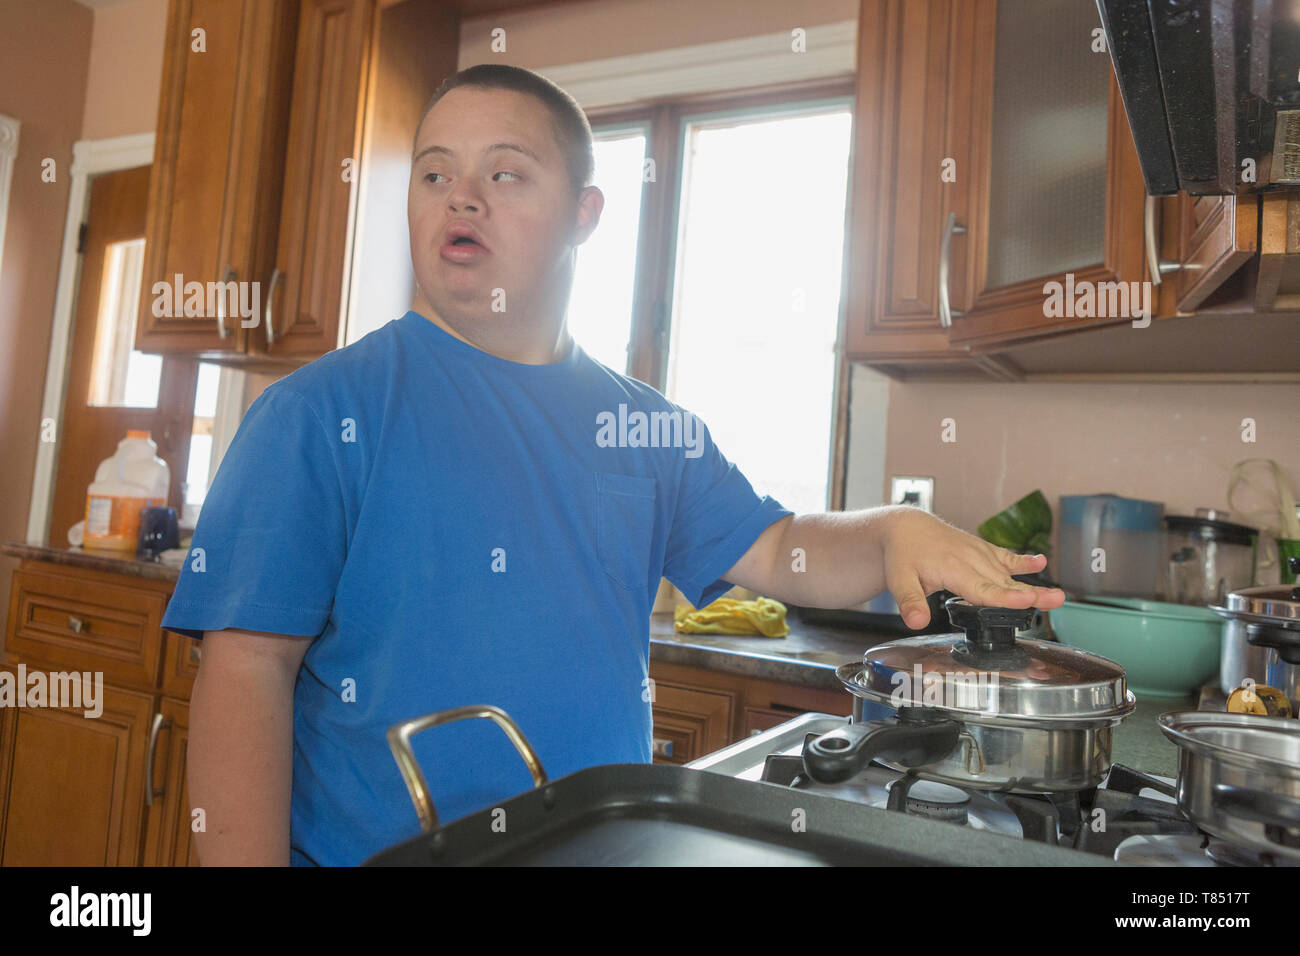 Teen boy with Down Syndrome cooking Stock Photo